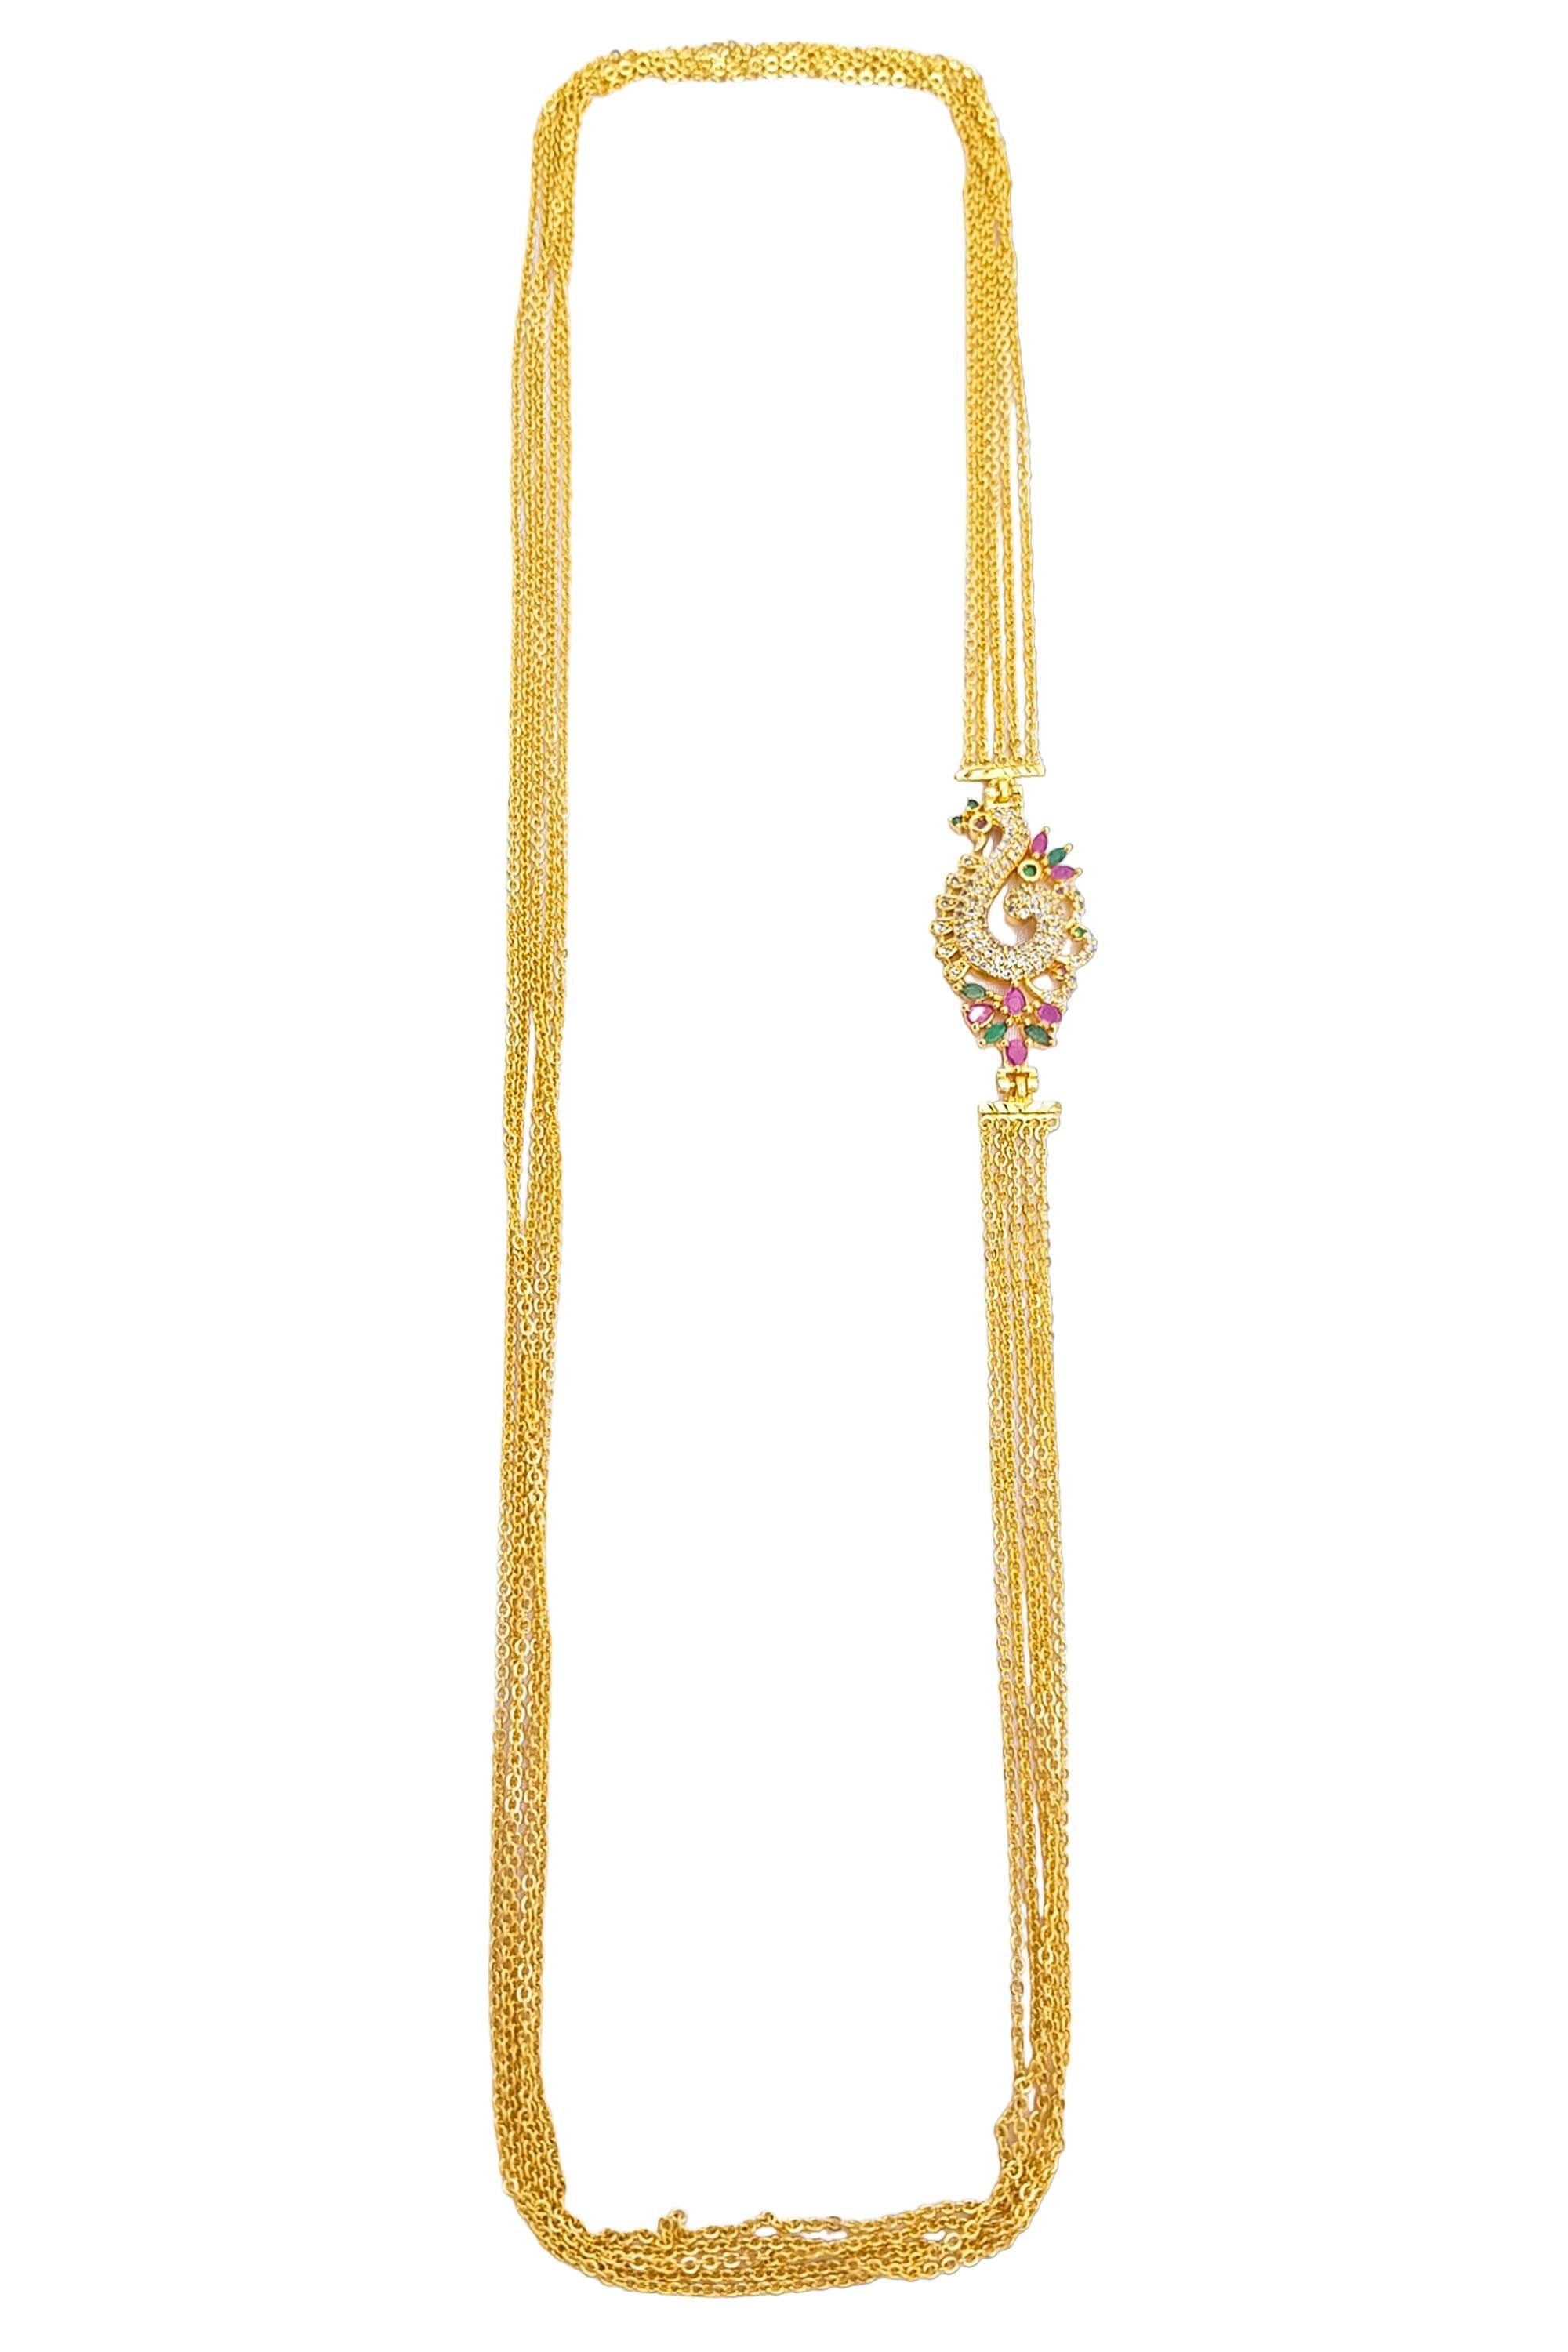 MicroGold Plated CZ Studded 5 Layer Mopu Chain 18141N